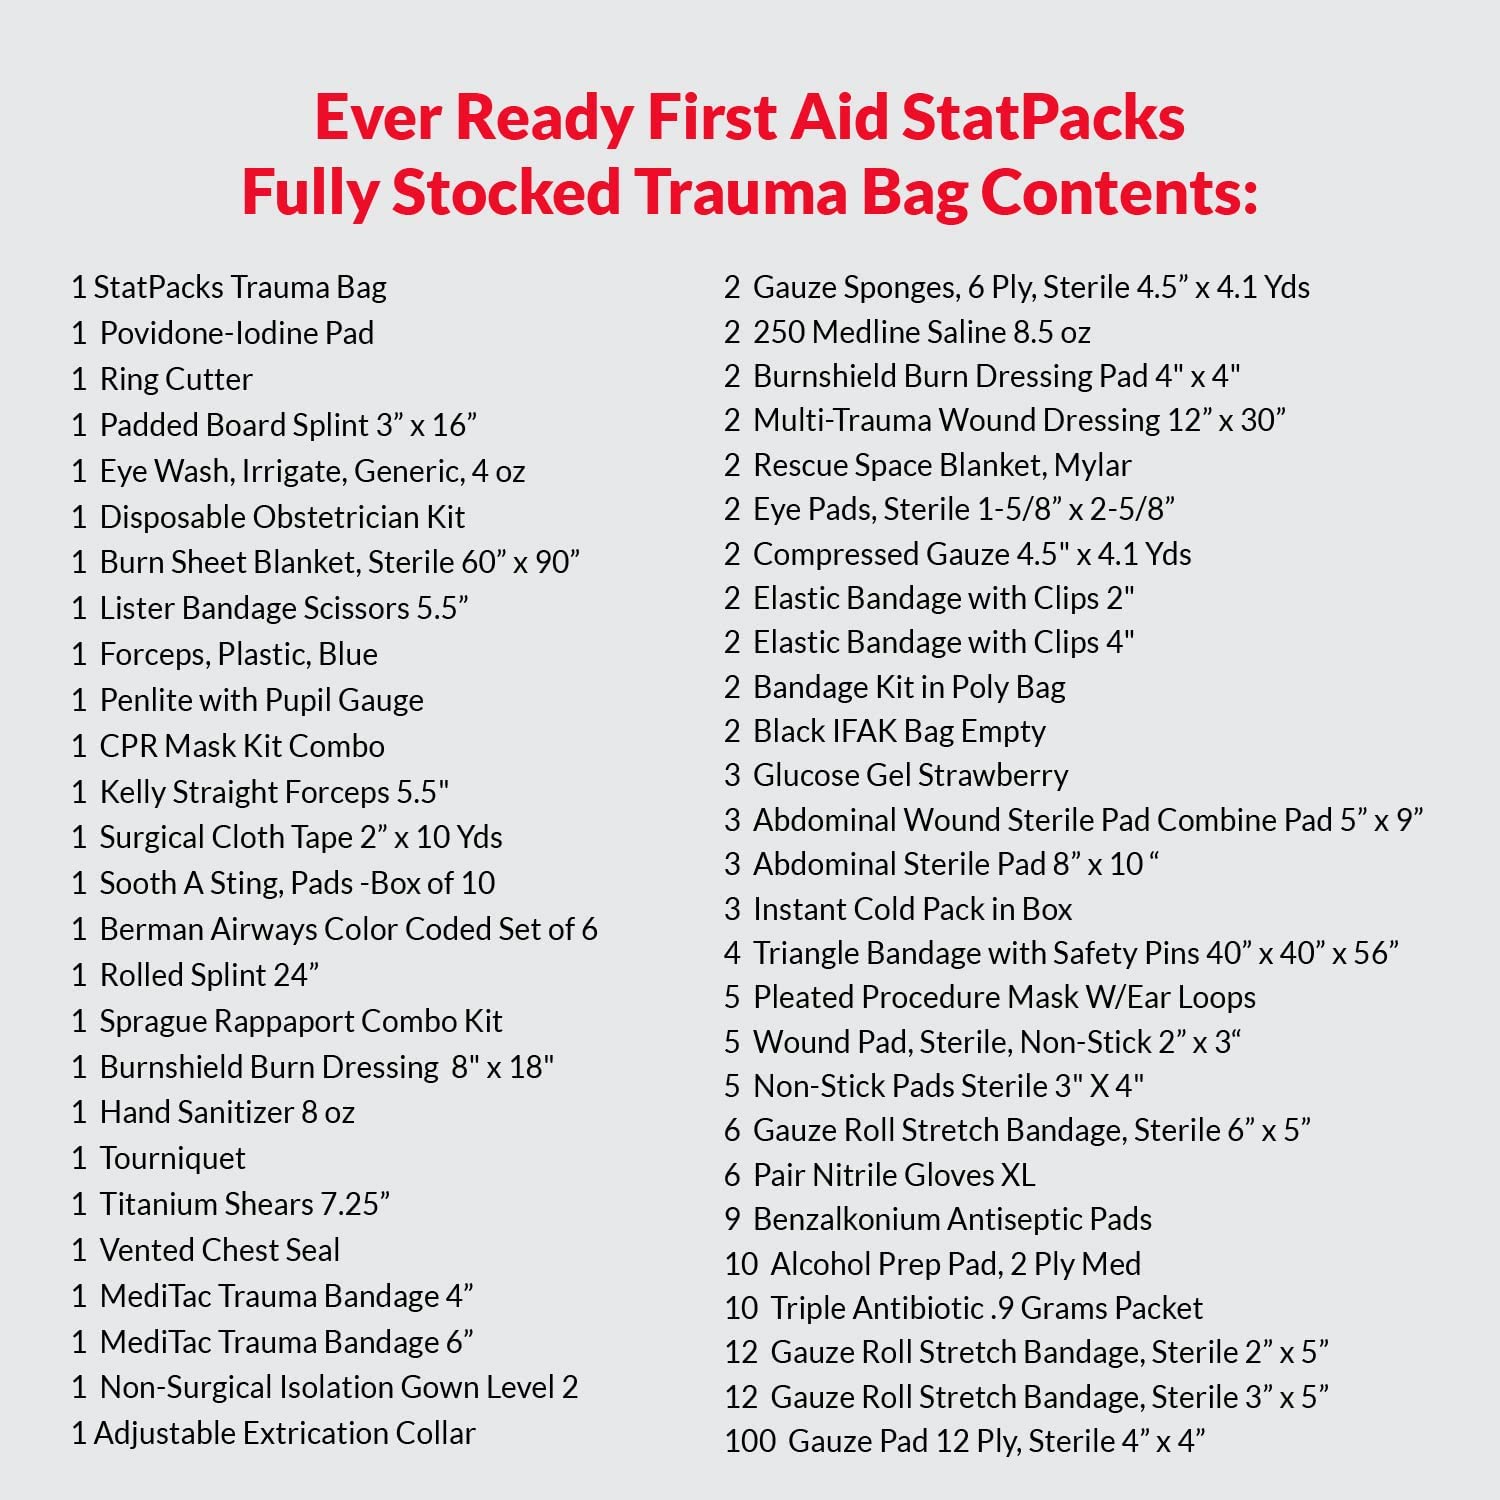 Ever Ready First Aid StatPacks Fully Stocked EMT Premium Trauma Bag for Firefighters & First Responders